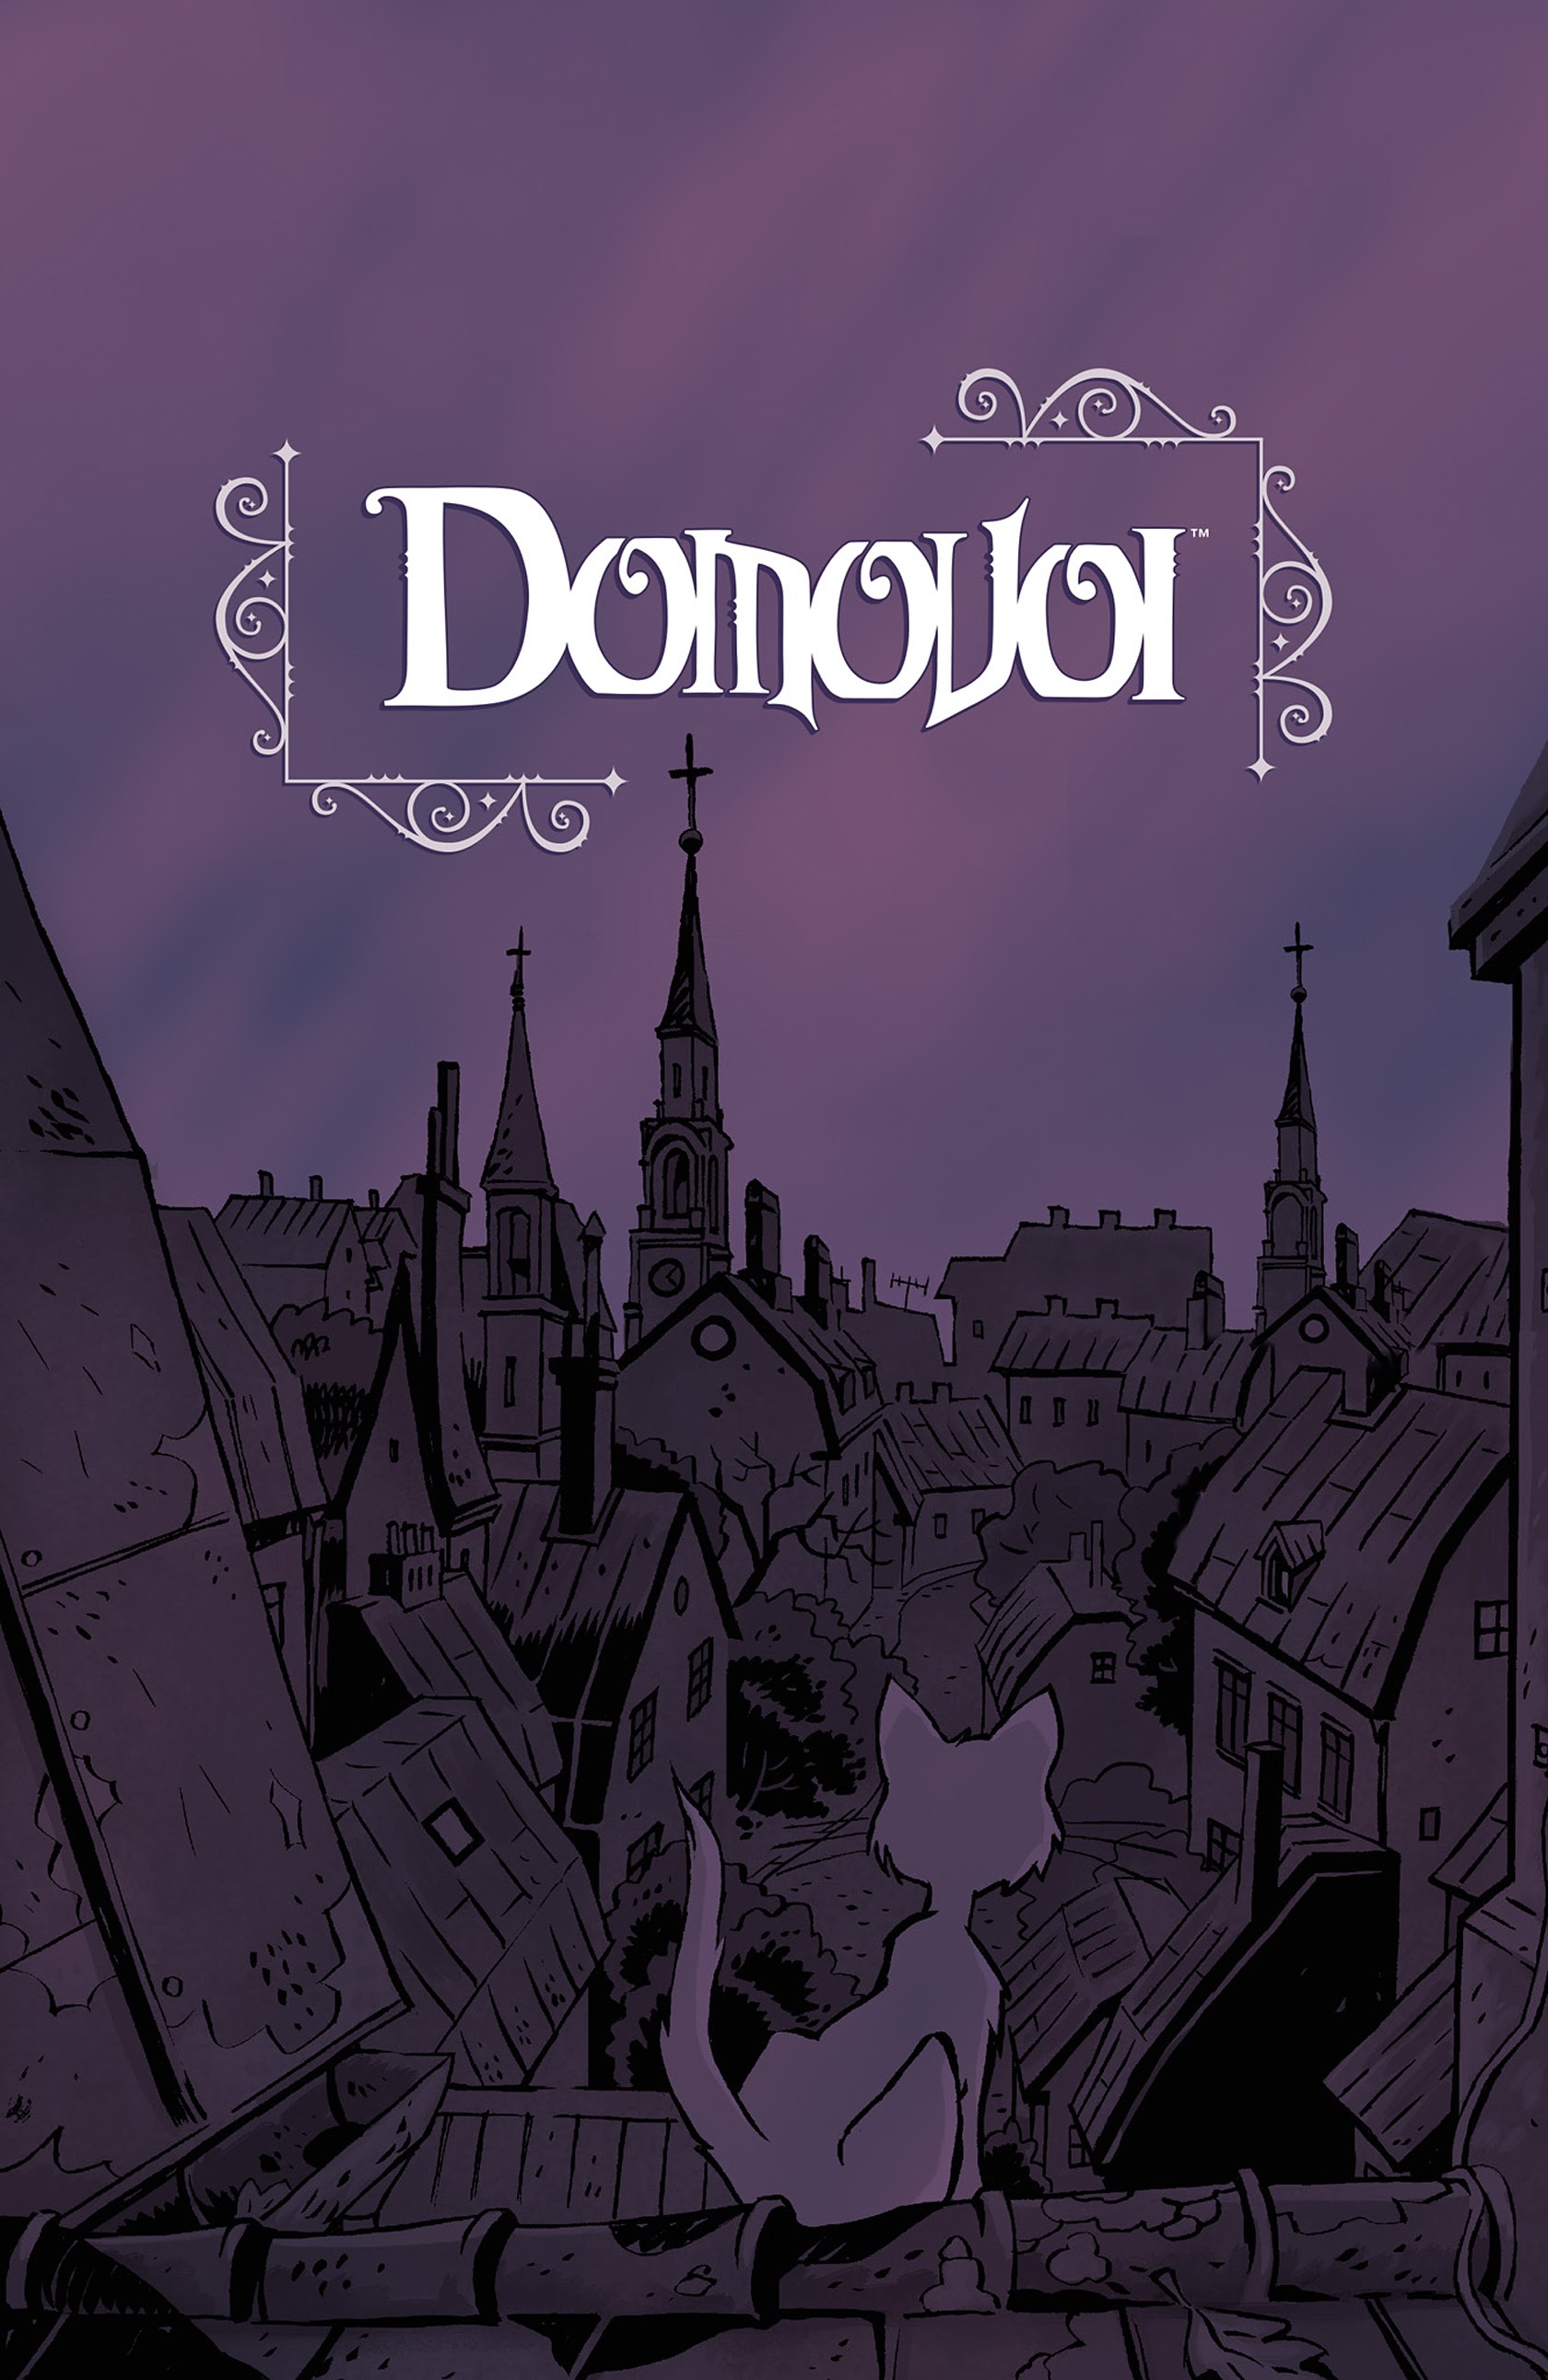 Read online Domovoi comic -  Issue # TPB - 2